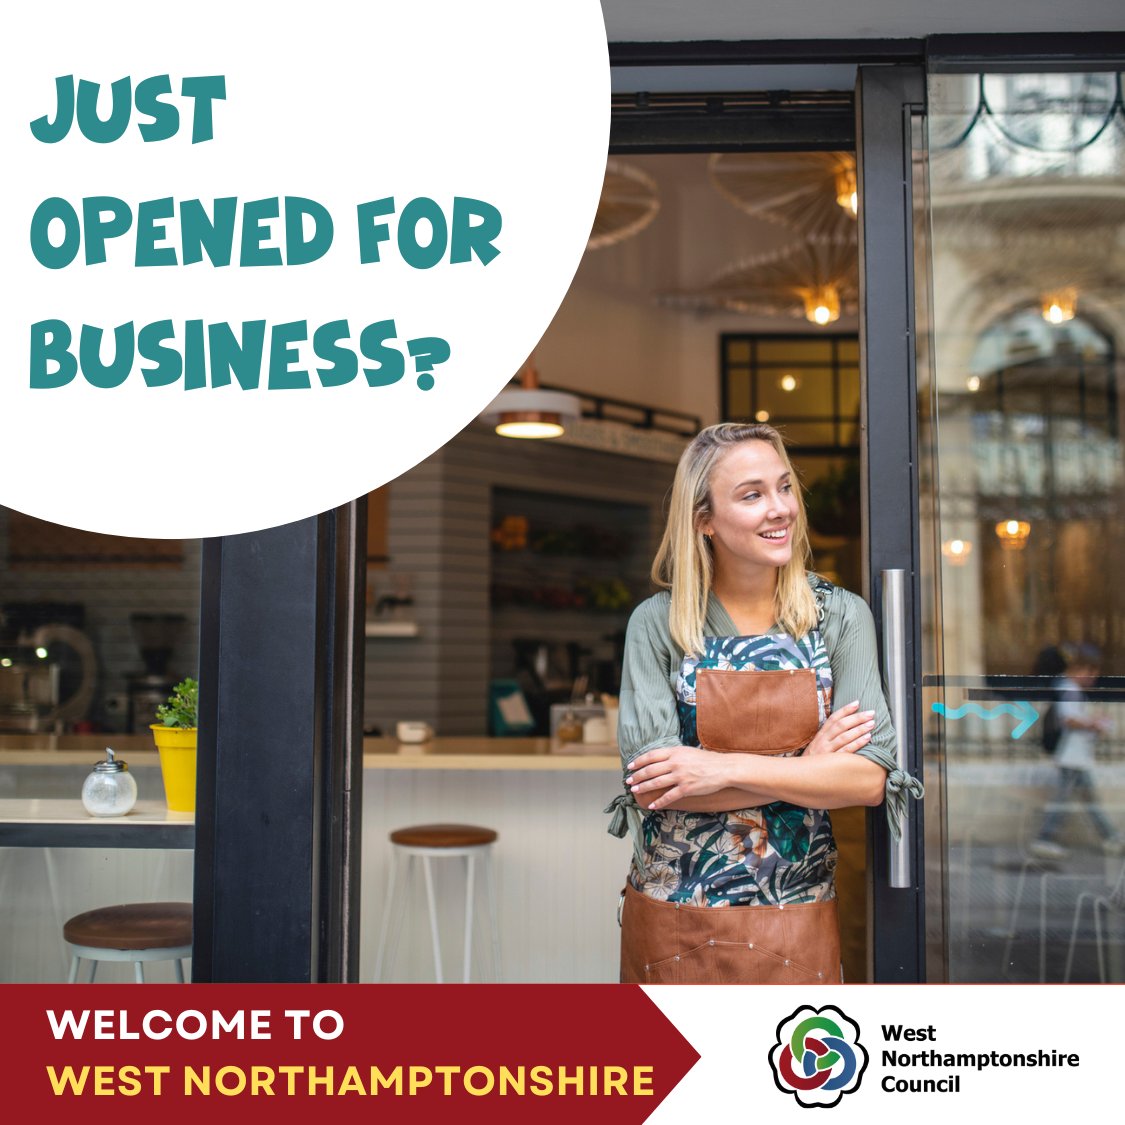 Whether you’re thinking of setting up a new business or you’ve just opened, we offer a range of information and support to help you thrive. Find out more at ow.ly/yRIW50R7wu7 #WelcometoWestNorthants